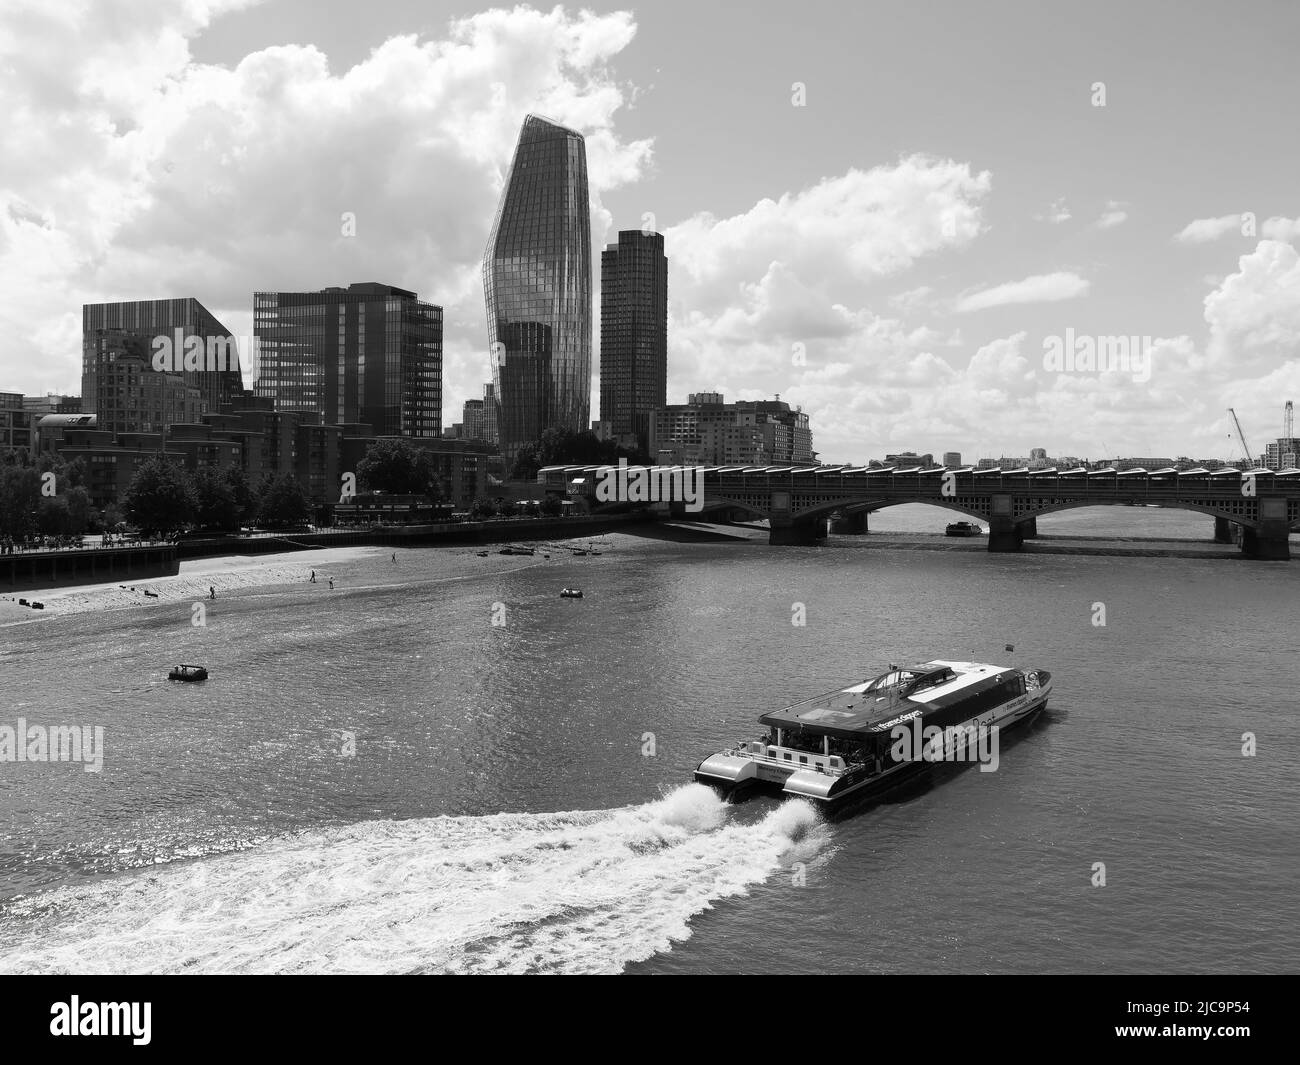 London, Greater London, England, June 08 2022: Monochrome. Uber boat on the River Thames with Blackfriars Bridge behind. Stock Photo